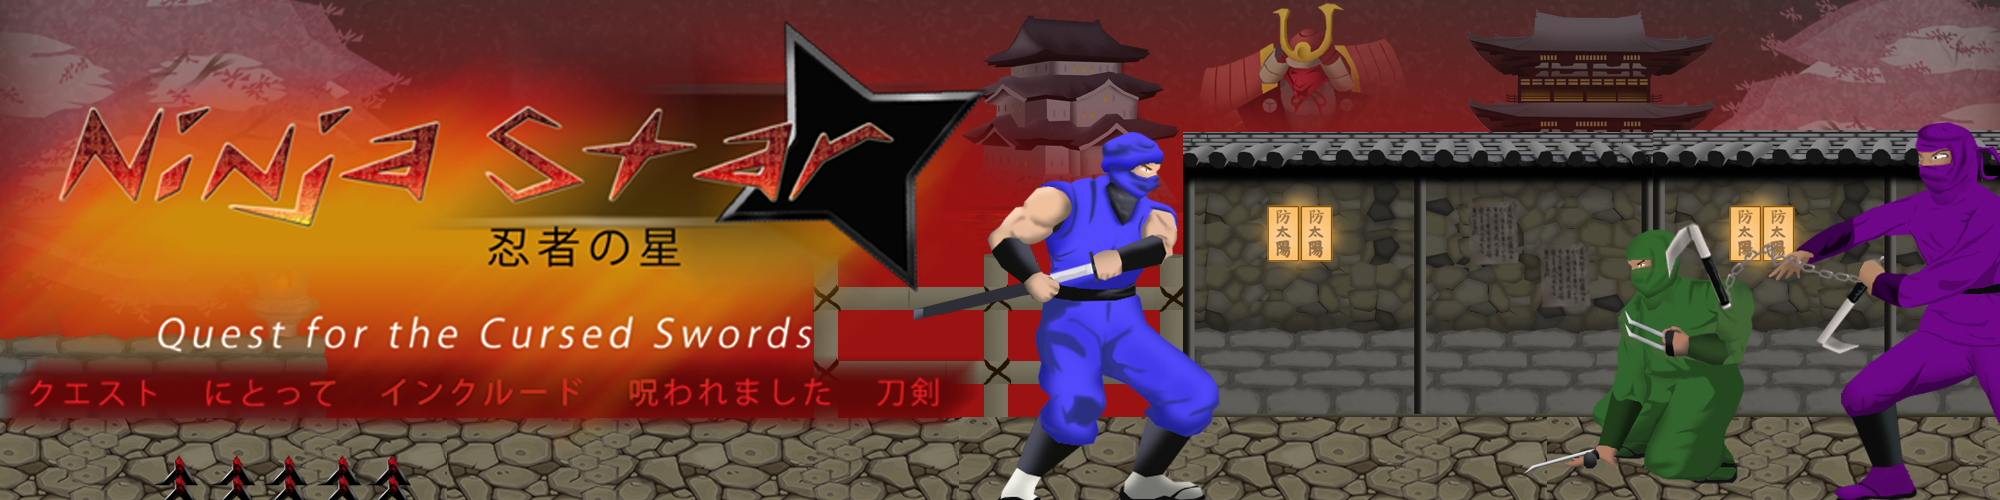 Ninja Star Quest for the Cursed Swords